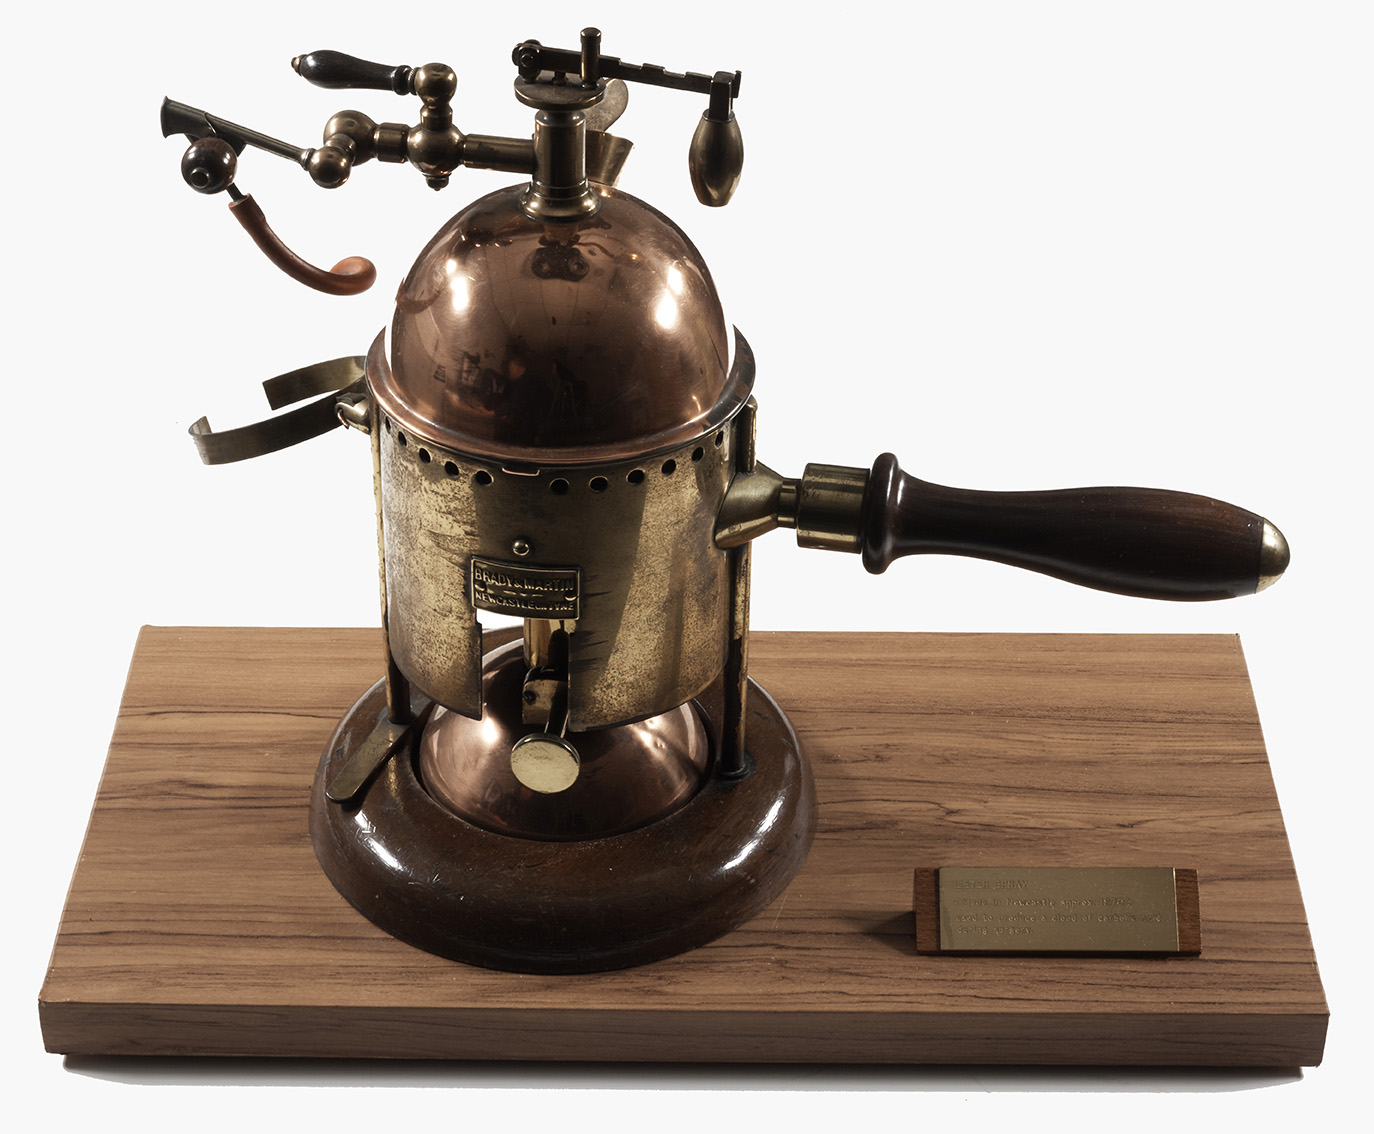 <p>Photograph of Joseph Lister’s Carbolic Spray. The device was used in operating theatres and it sprayed the carbolic acid into the air. Lister hoped this would kill airbone bacteria and reduce the chance of infection during surgery. Although not as effective as applying the carbolic acid directly to the wound, Lister found that the rate of infection after his surgery’s dropped significnatly when using the Carbolic Spray.</p>
